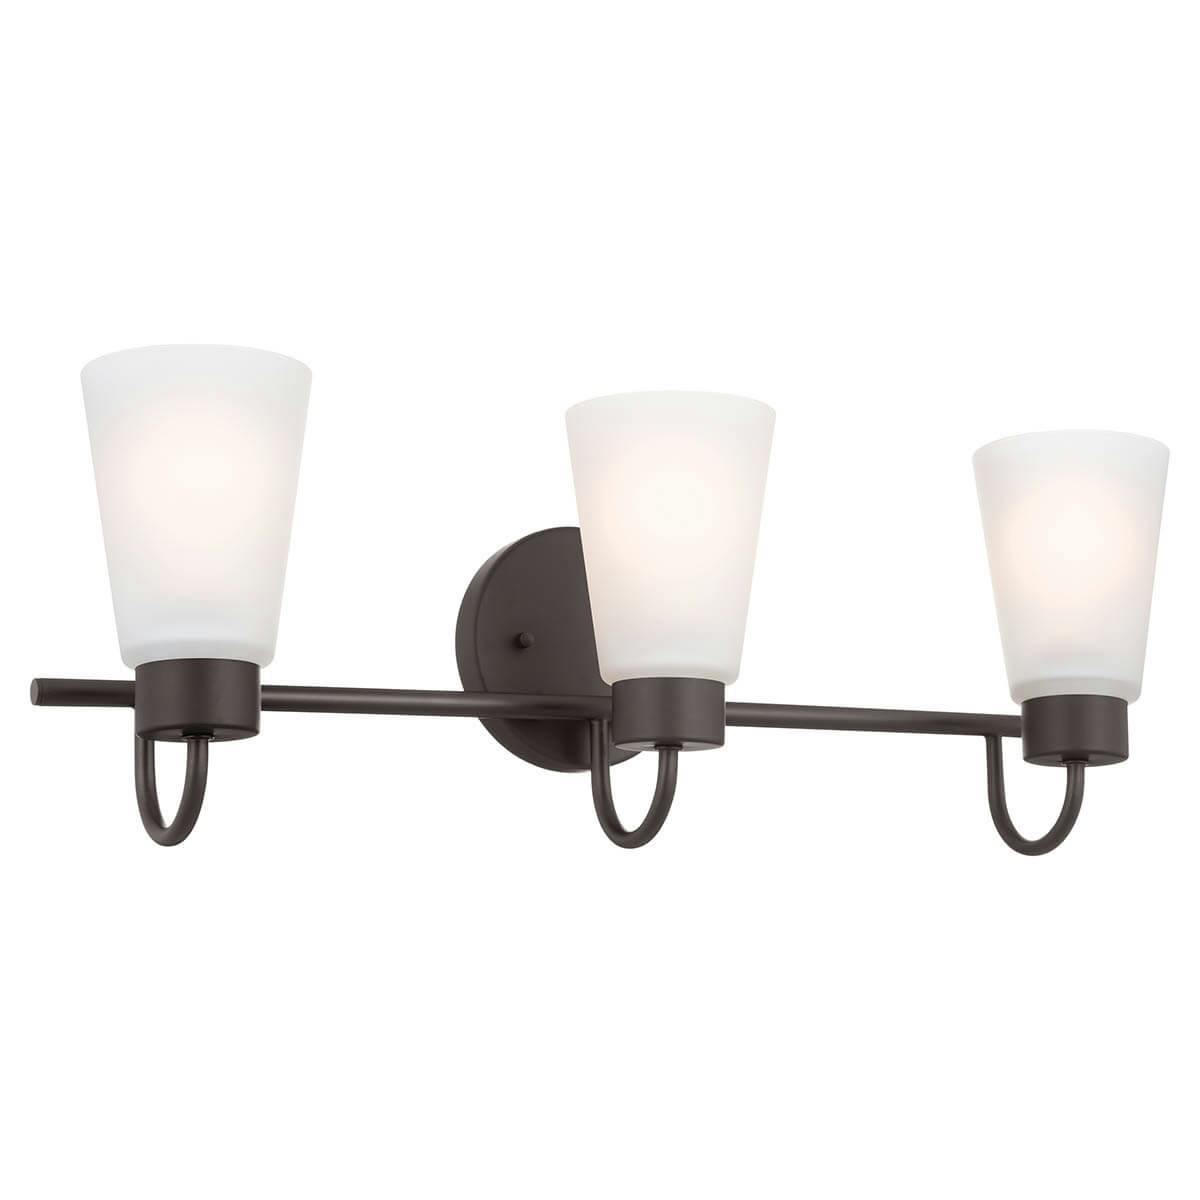 The Erma 20.5"  Vanity Light Olde Bronze facing up on a white background